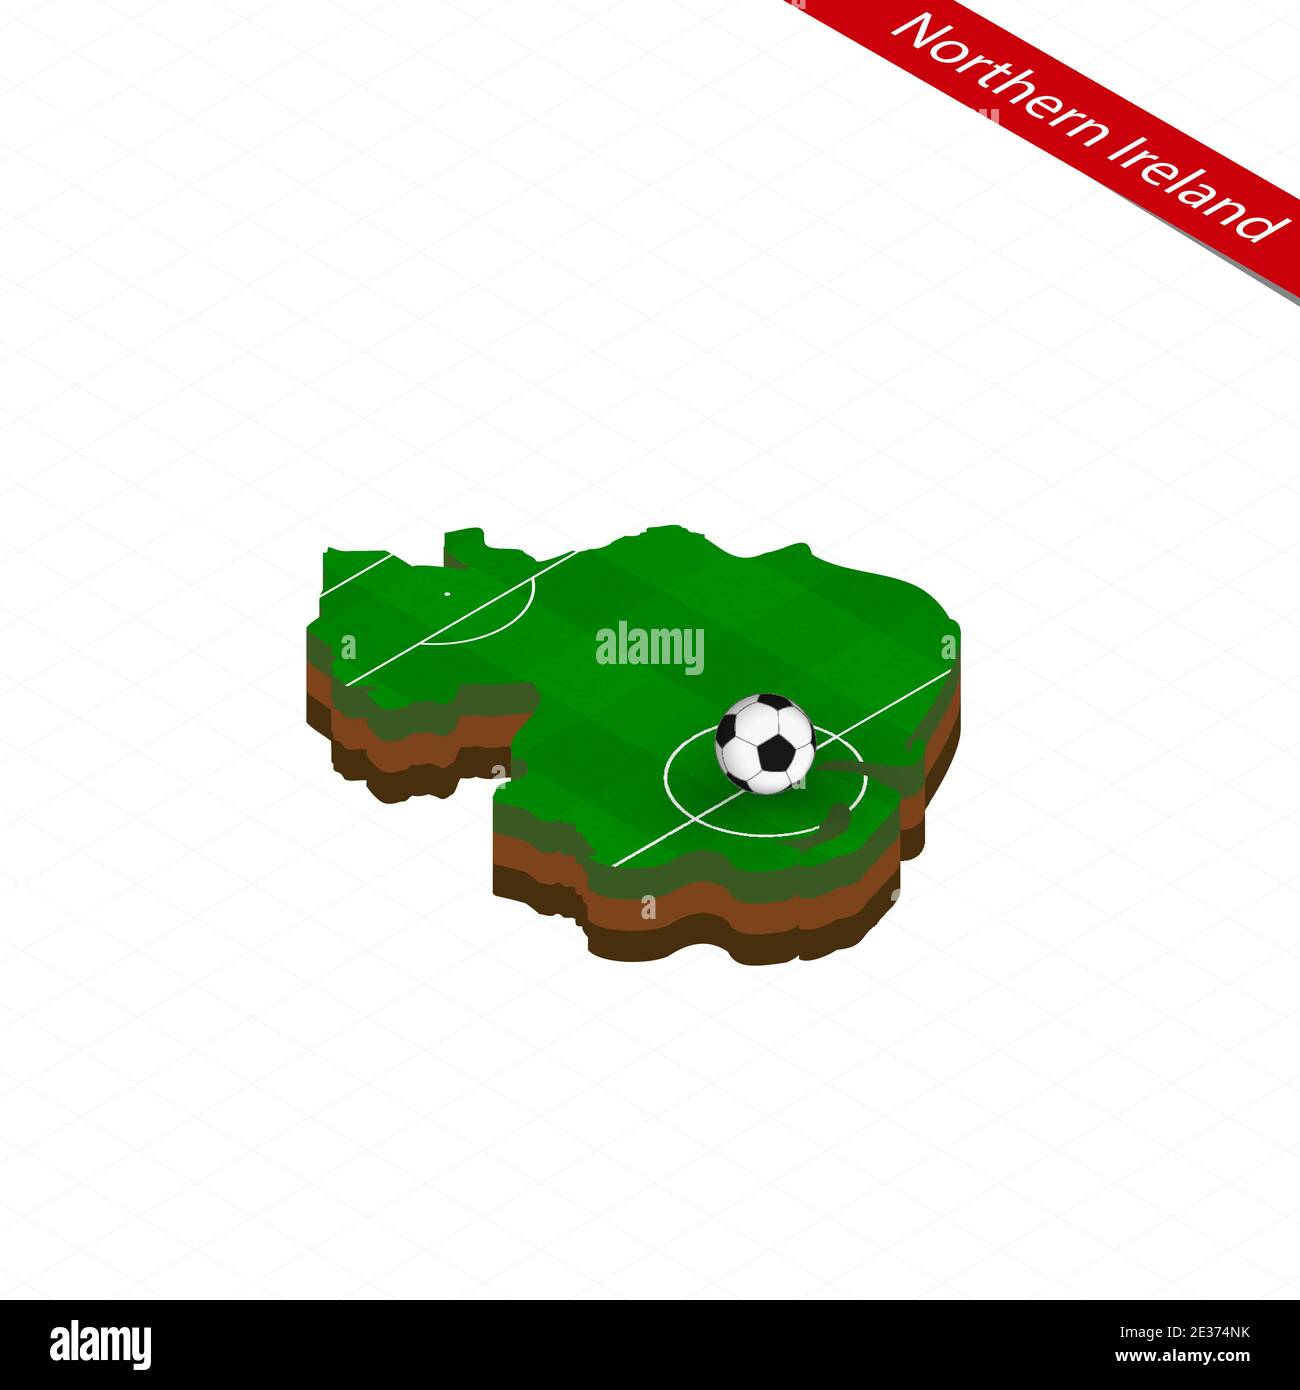 Football ireland green world cup Stock Vector Images - Alamy